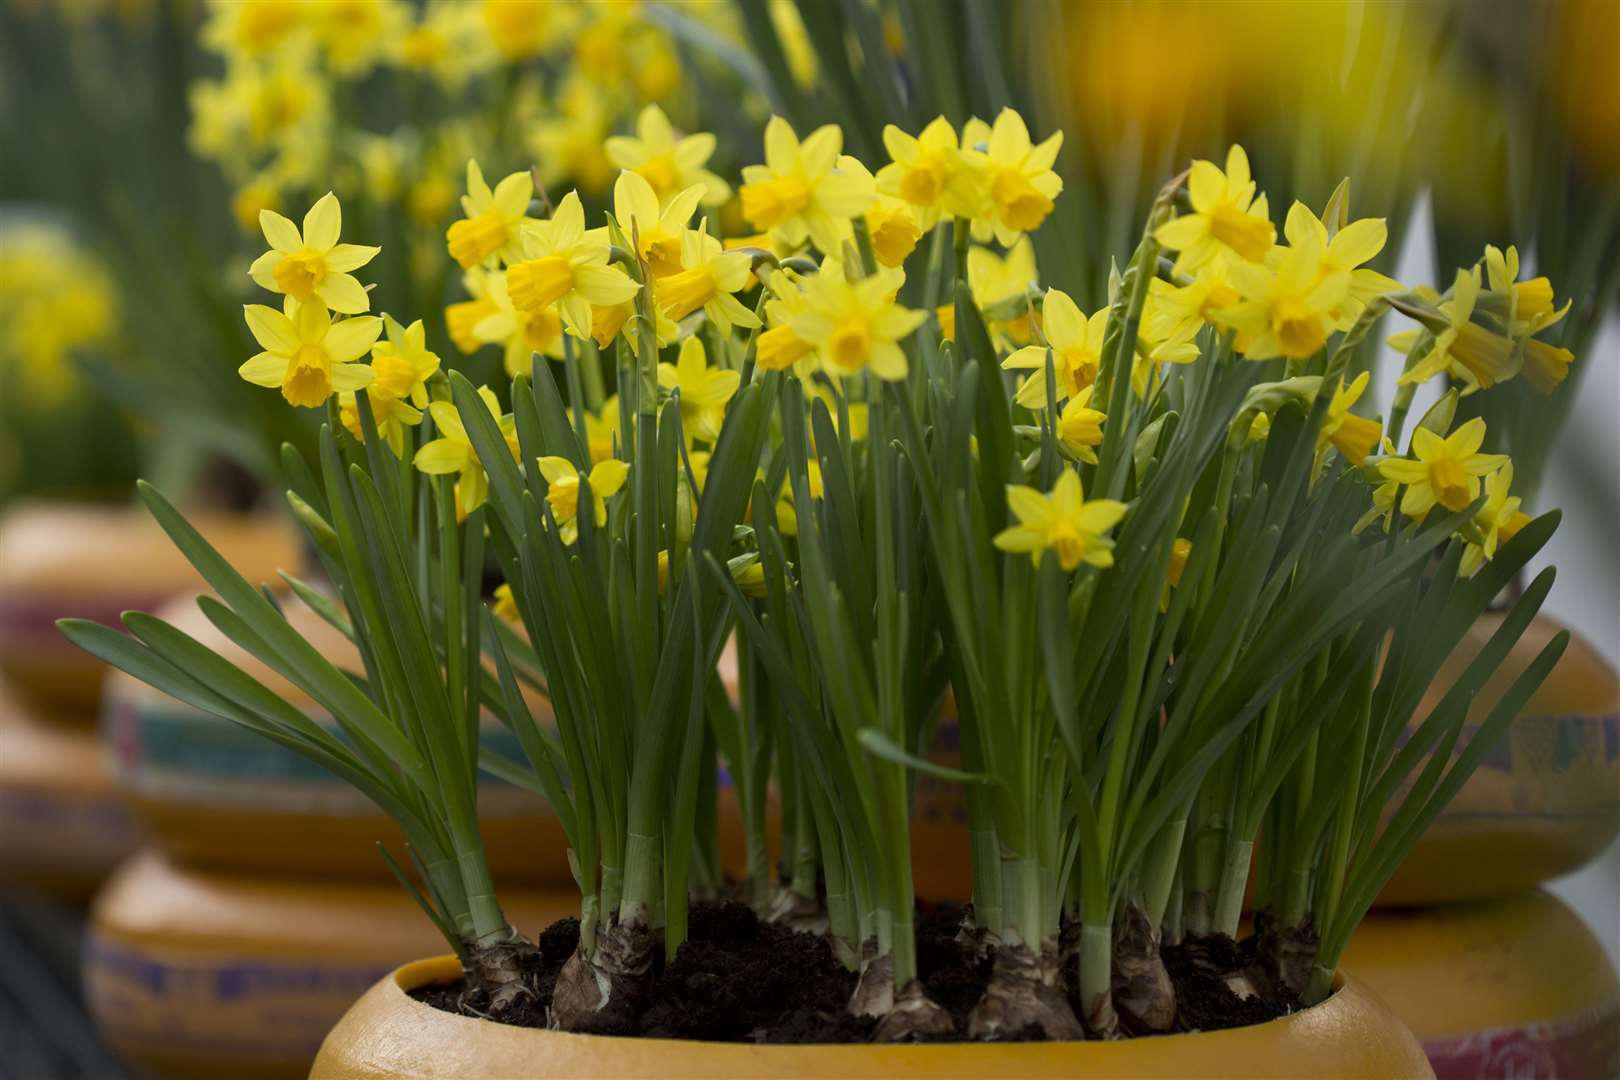 Dwarf daffs are perfect for potting if you have no outdoor space. Picture: iStock/PA